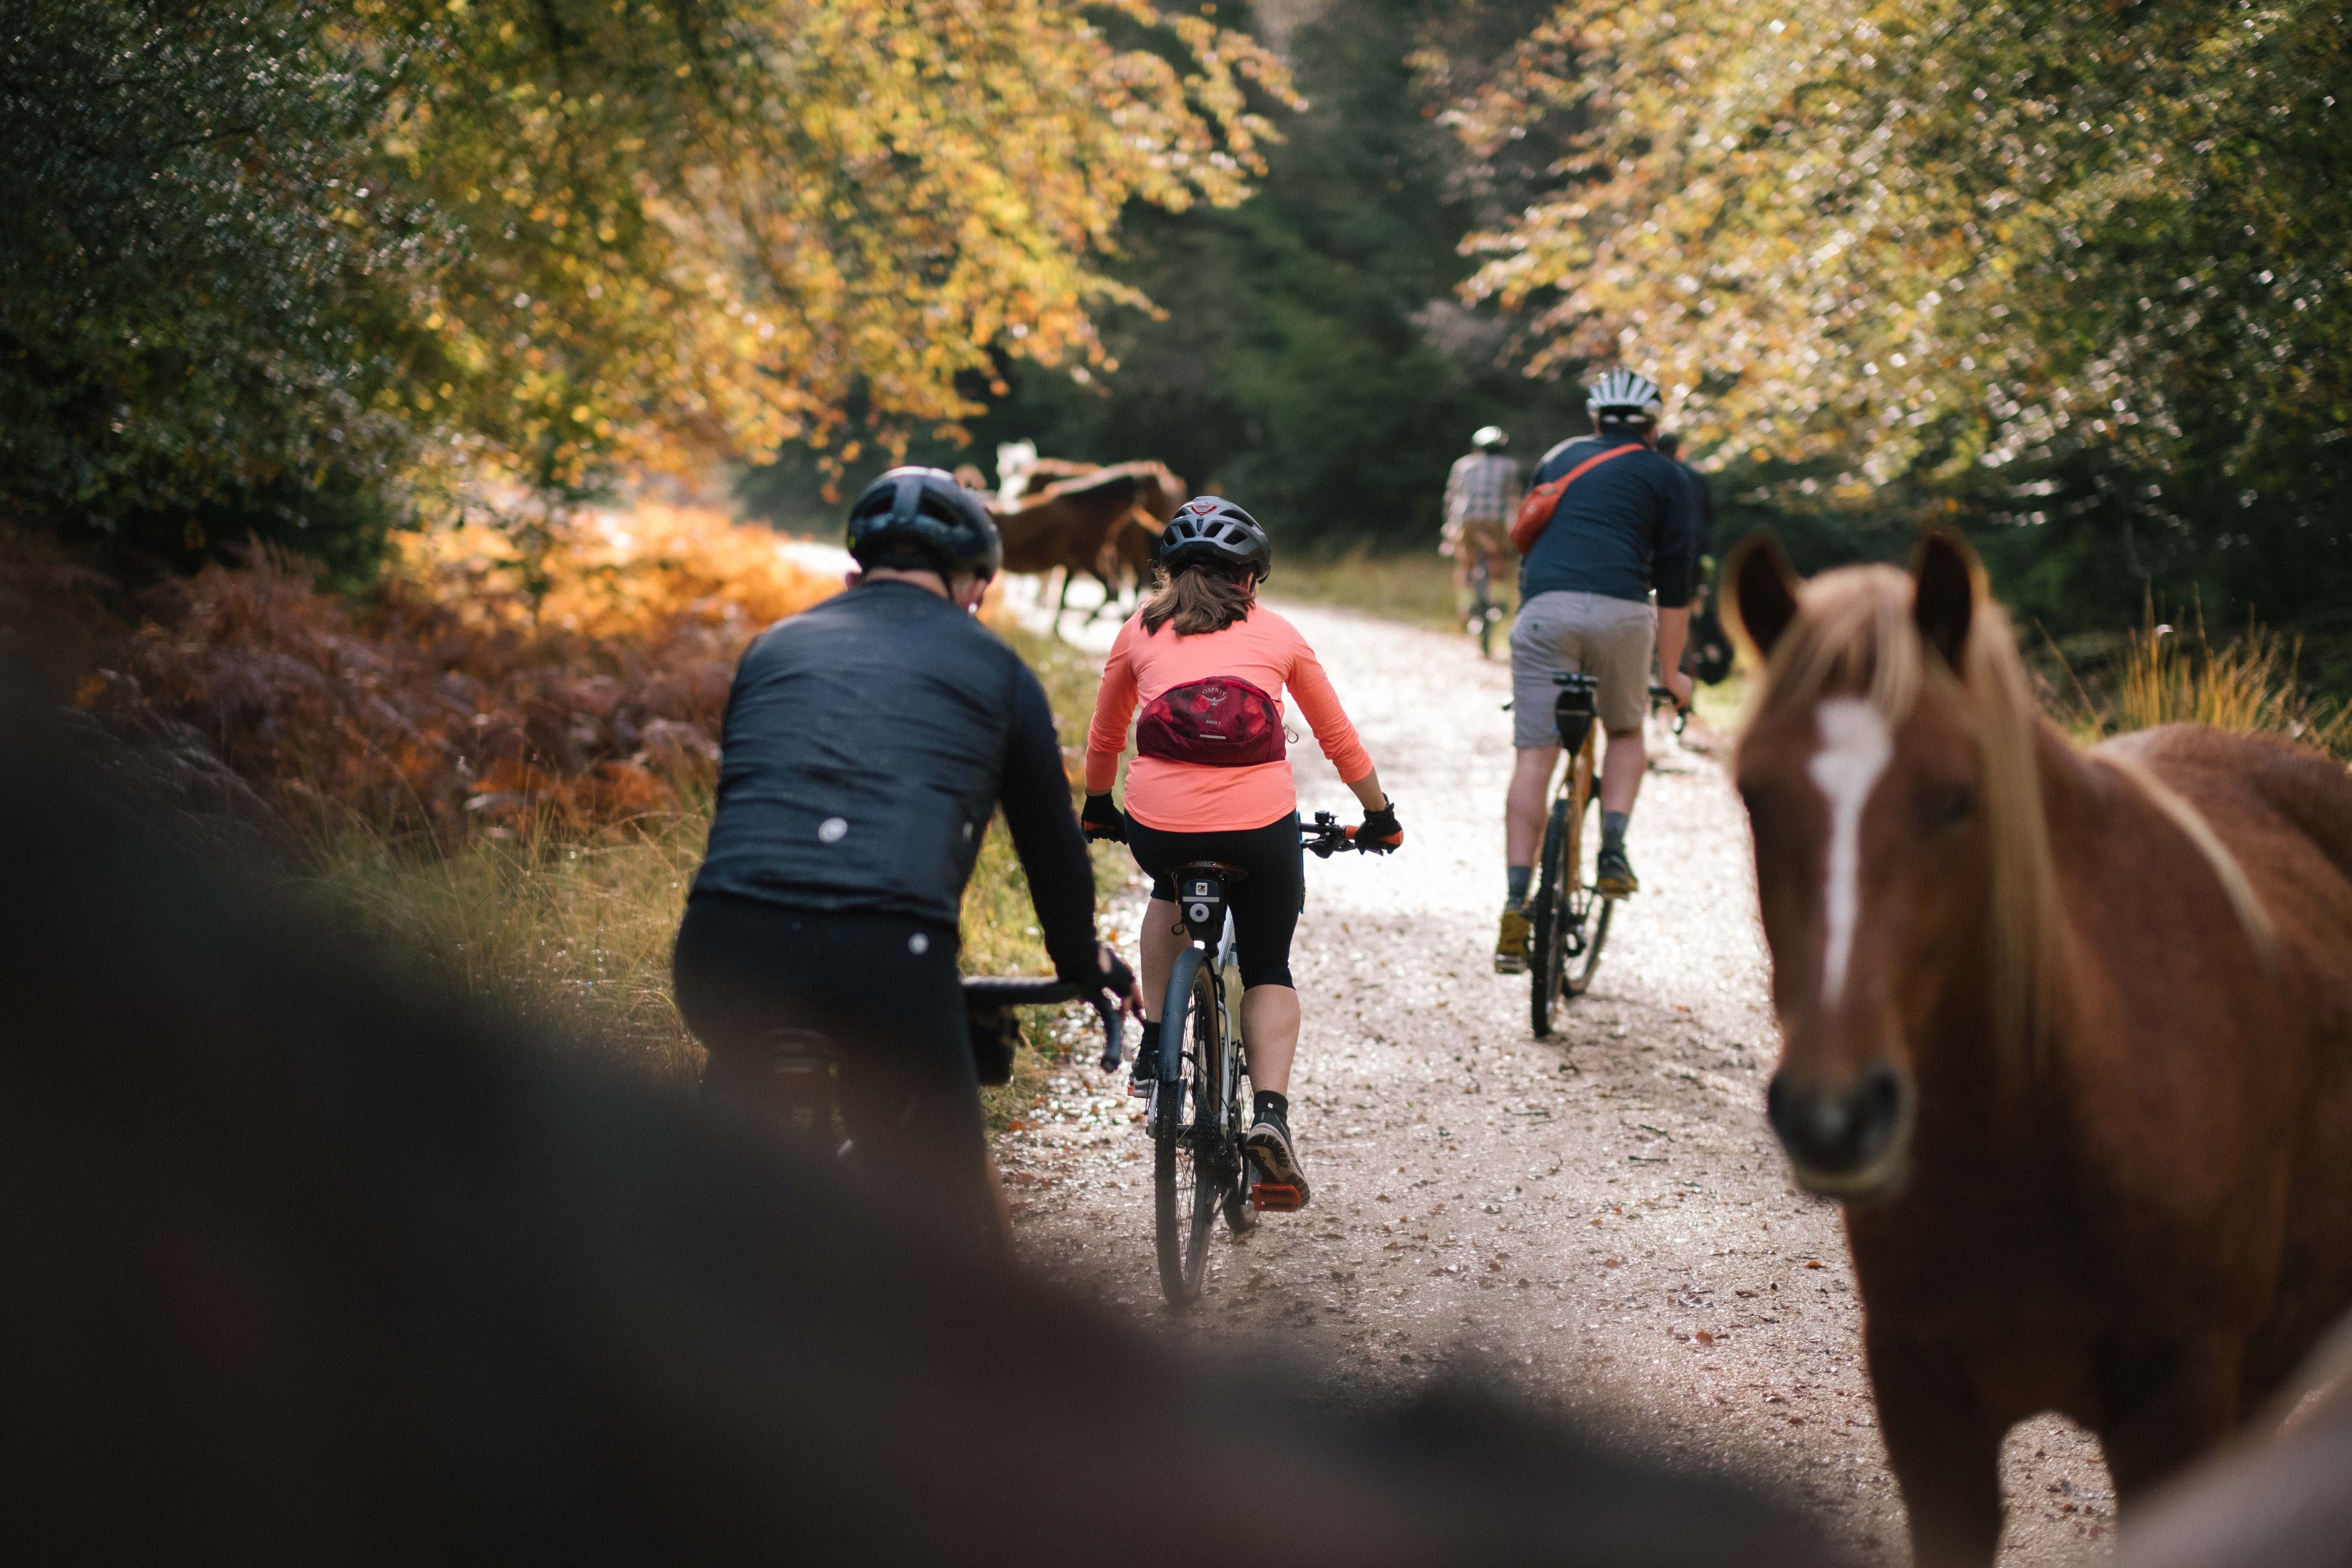 Group riding amongst ponies in the New Forest with The Woods Cyclery